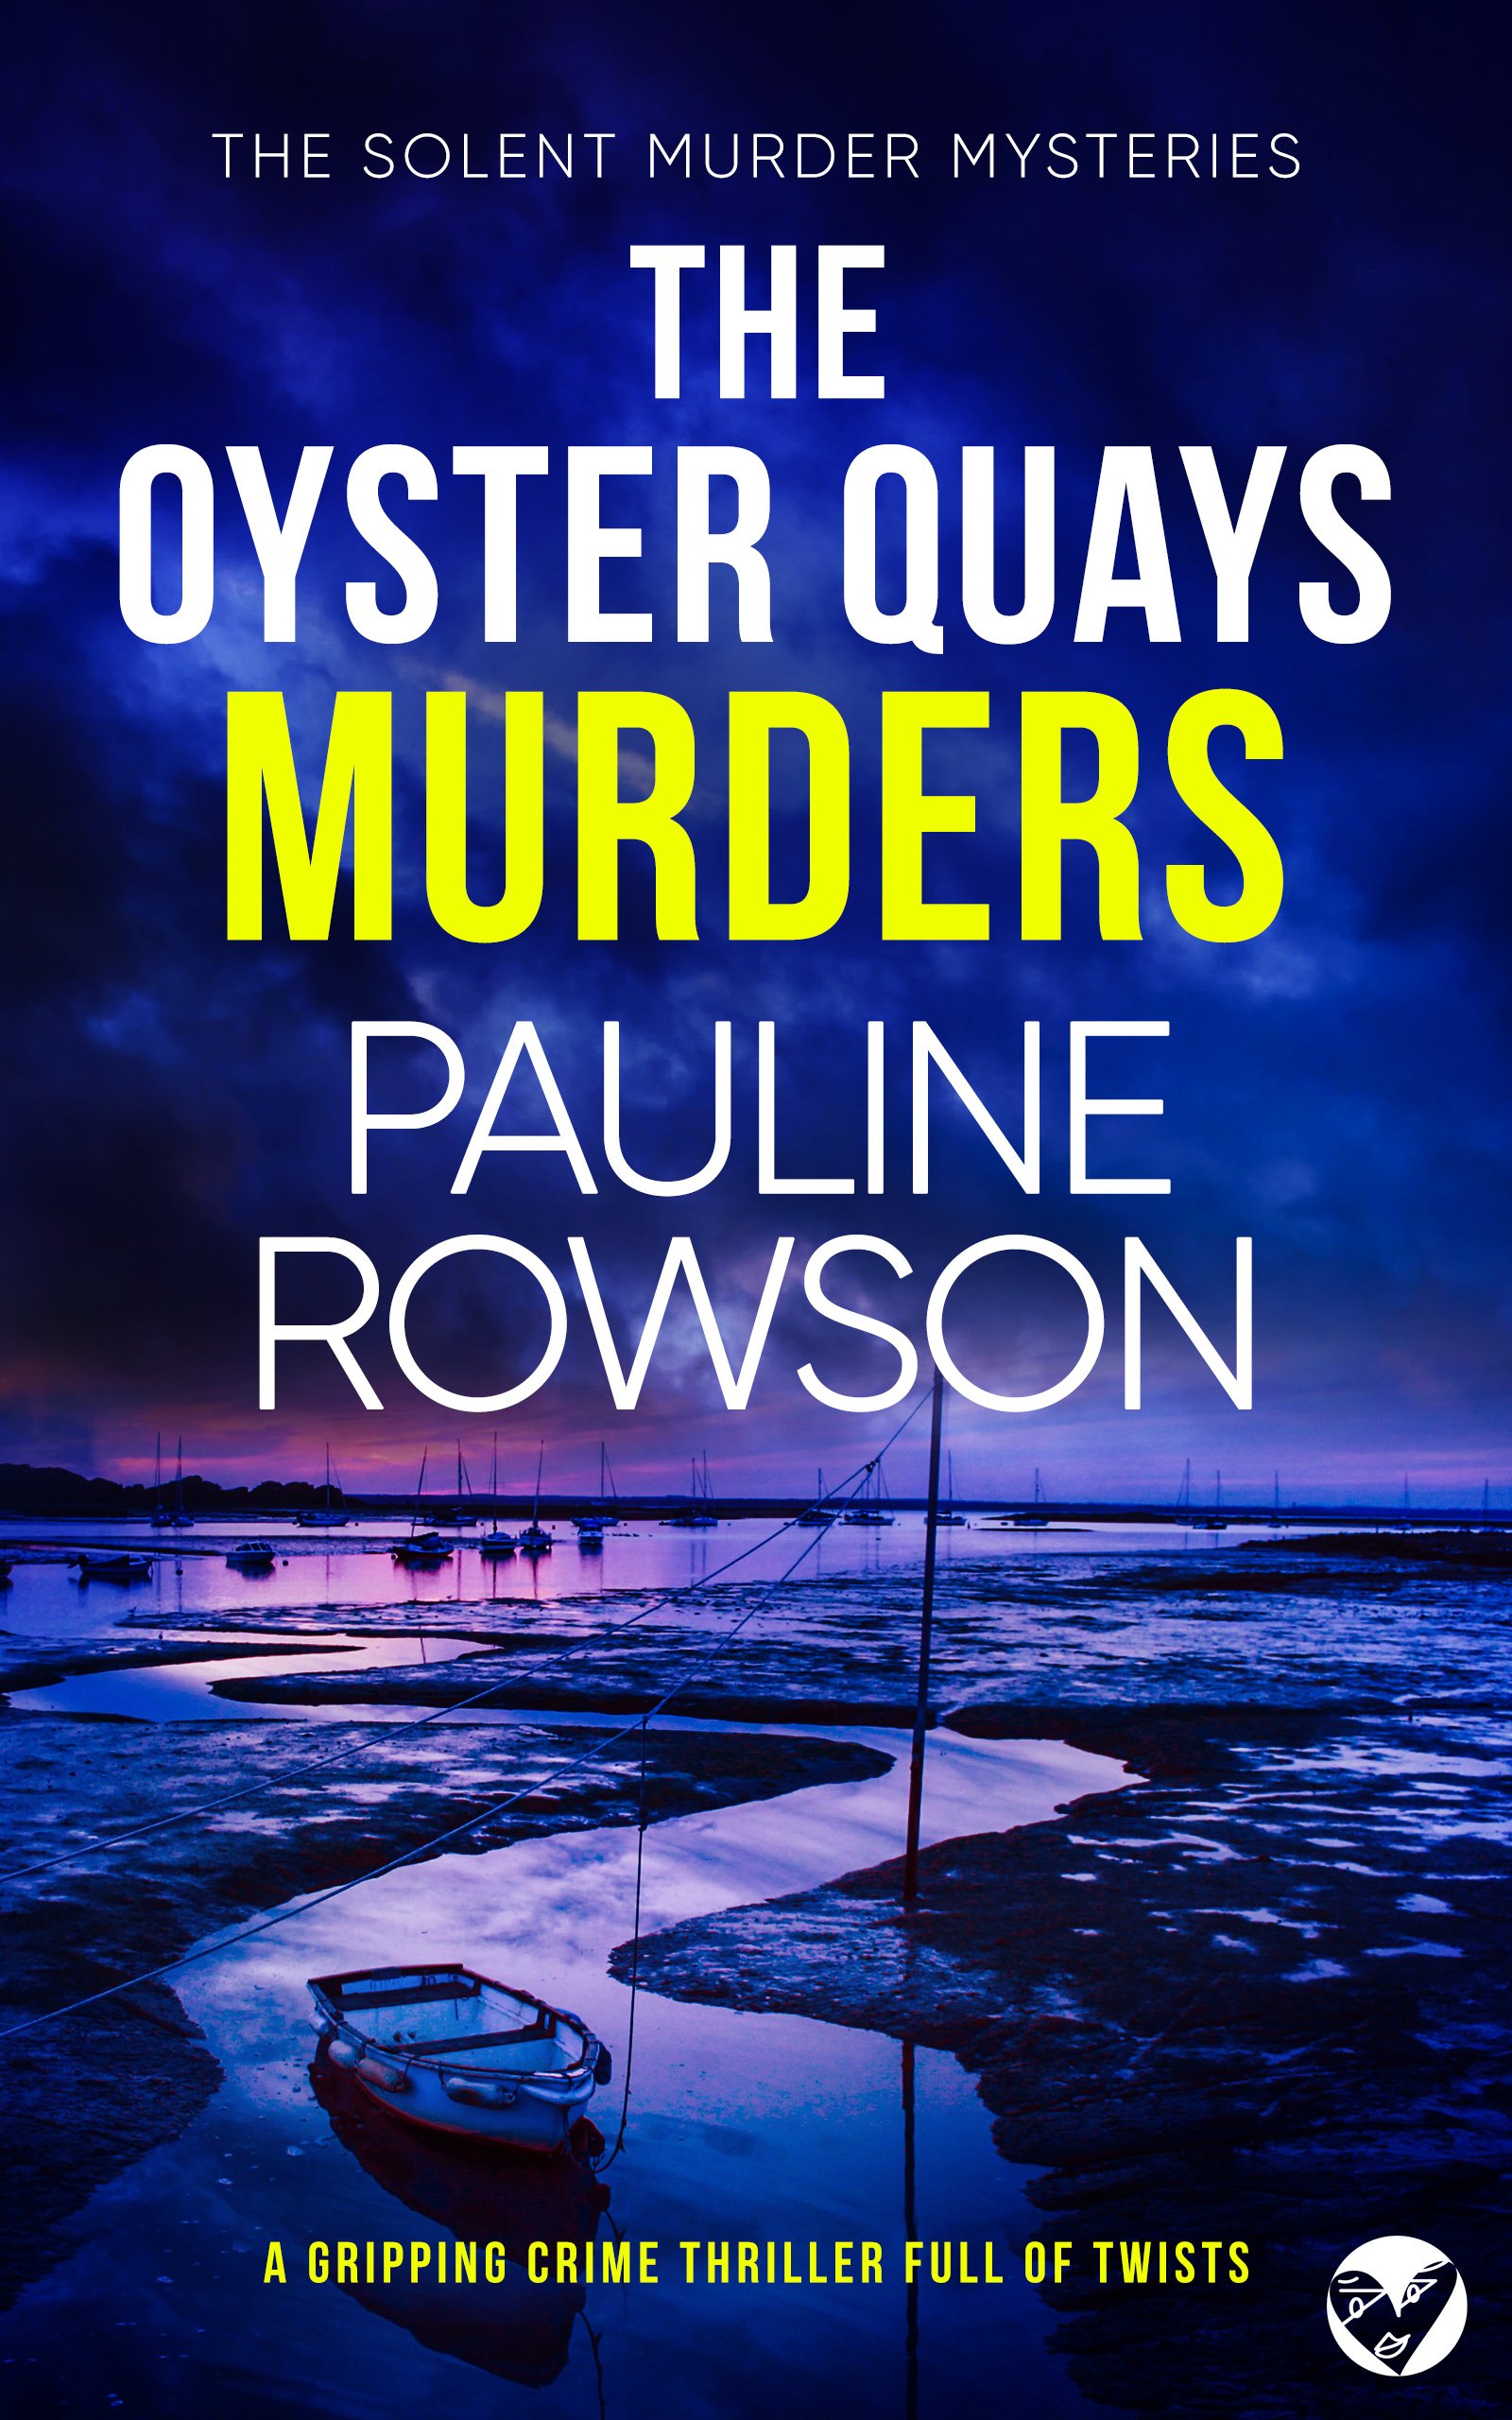 THE OYSTER QUAYS MURDERS Cover publish.jpg